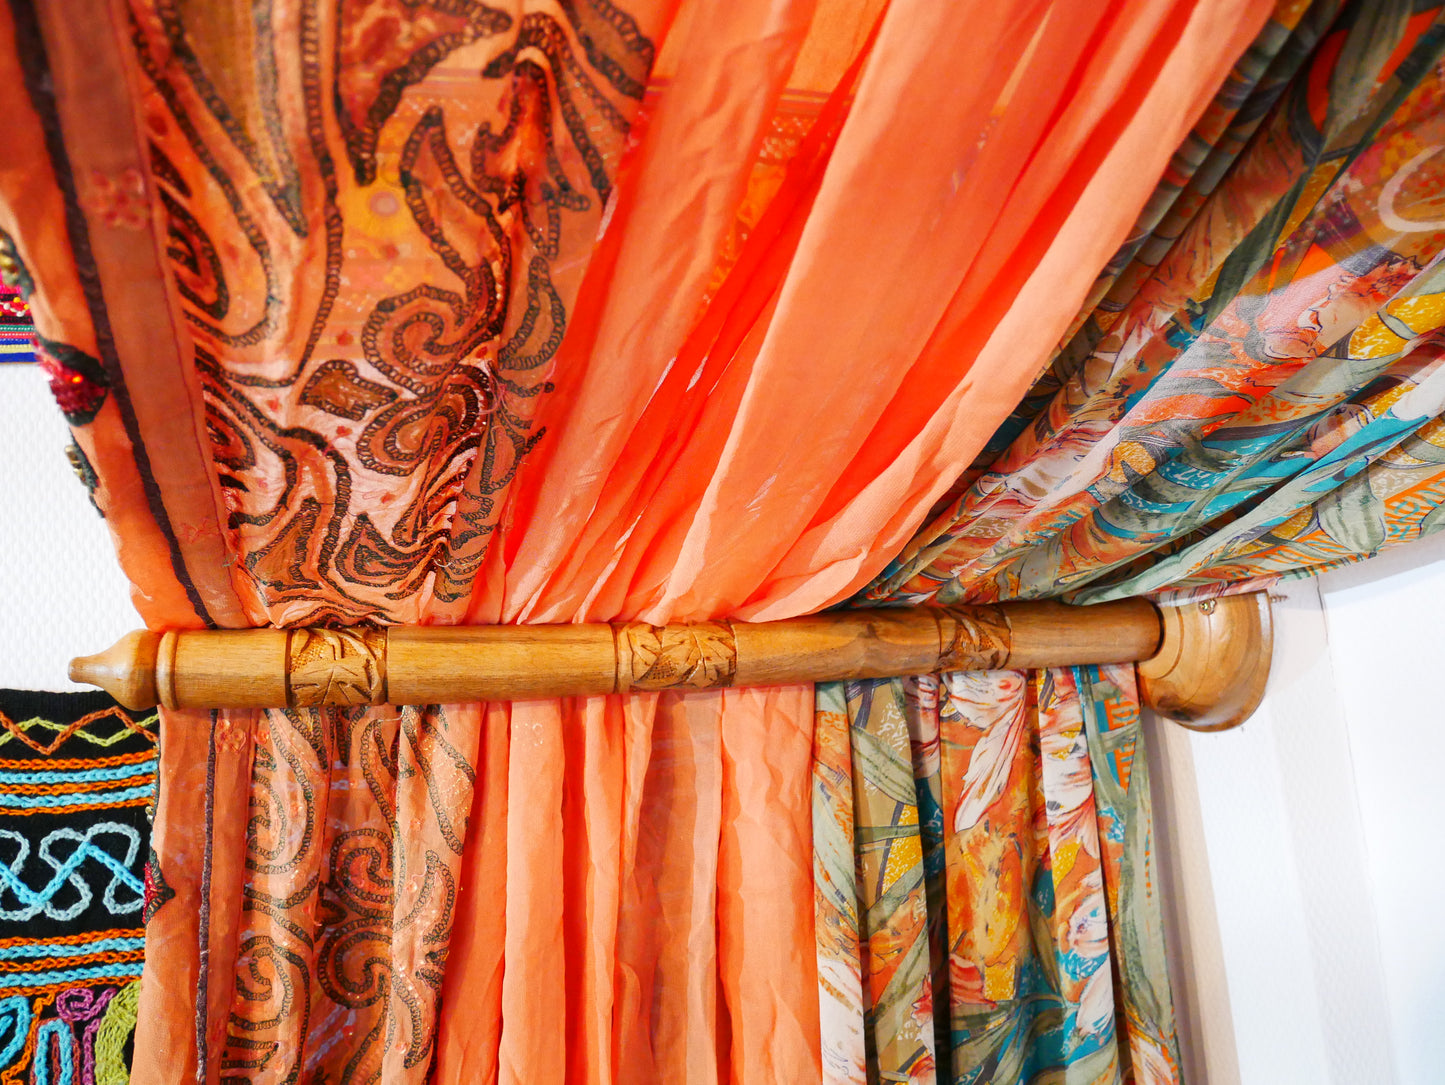 Wedding Saree bed canopy - Boho chic canopy with handcrafted walnut wood rods | bed curtains - meditation space